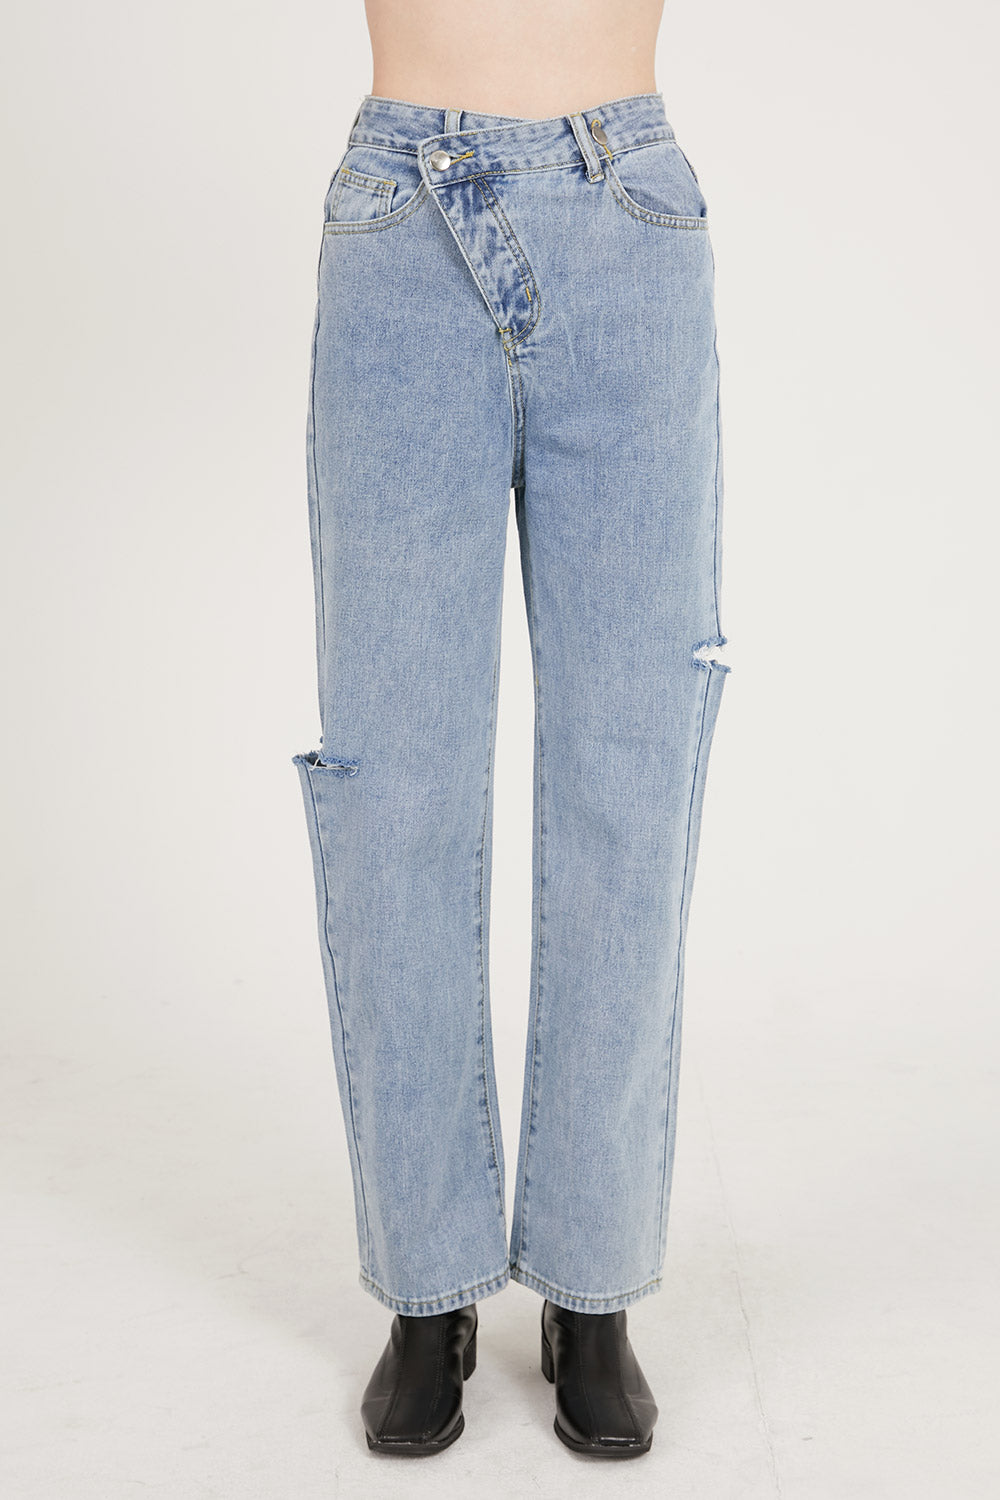 Ariana Wrap Front Fly Wide Leg Jeans